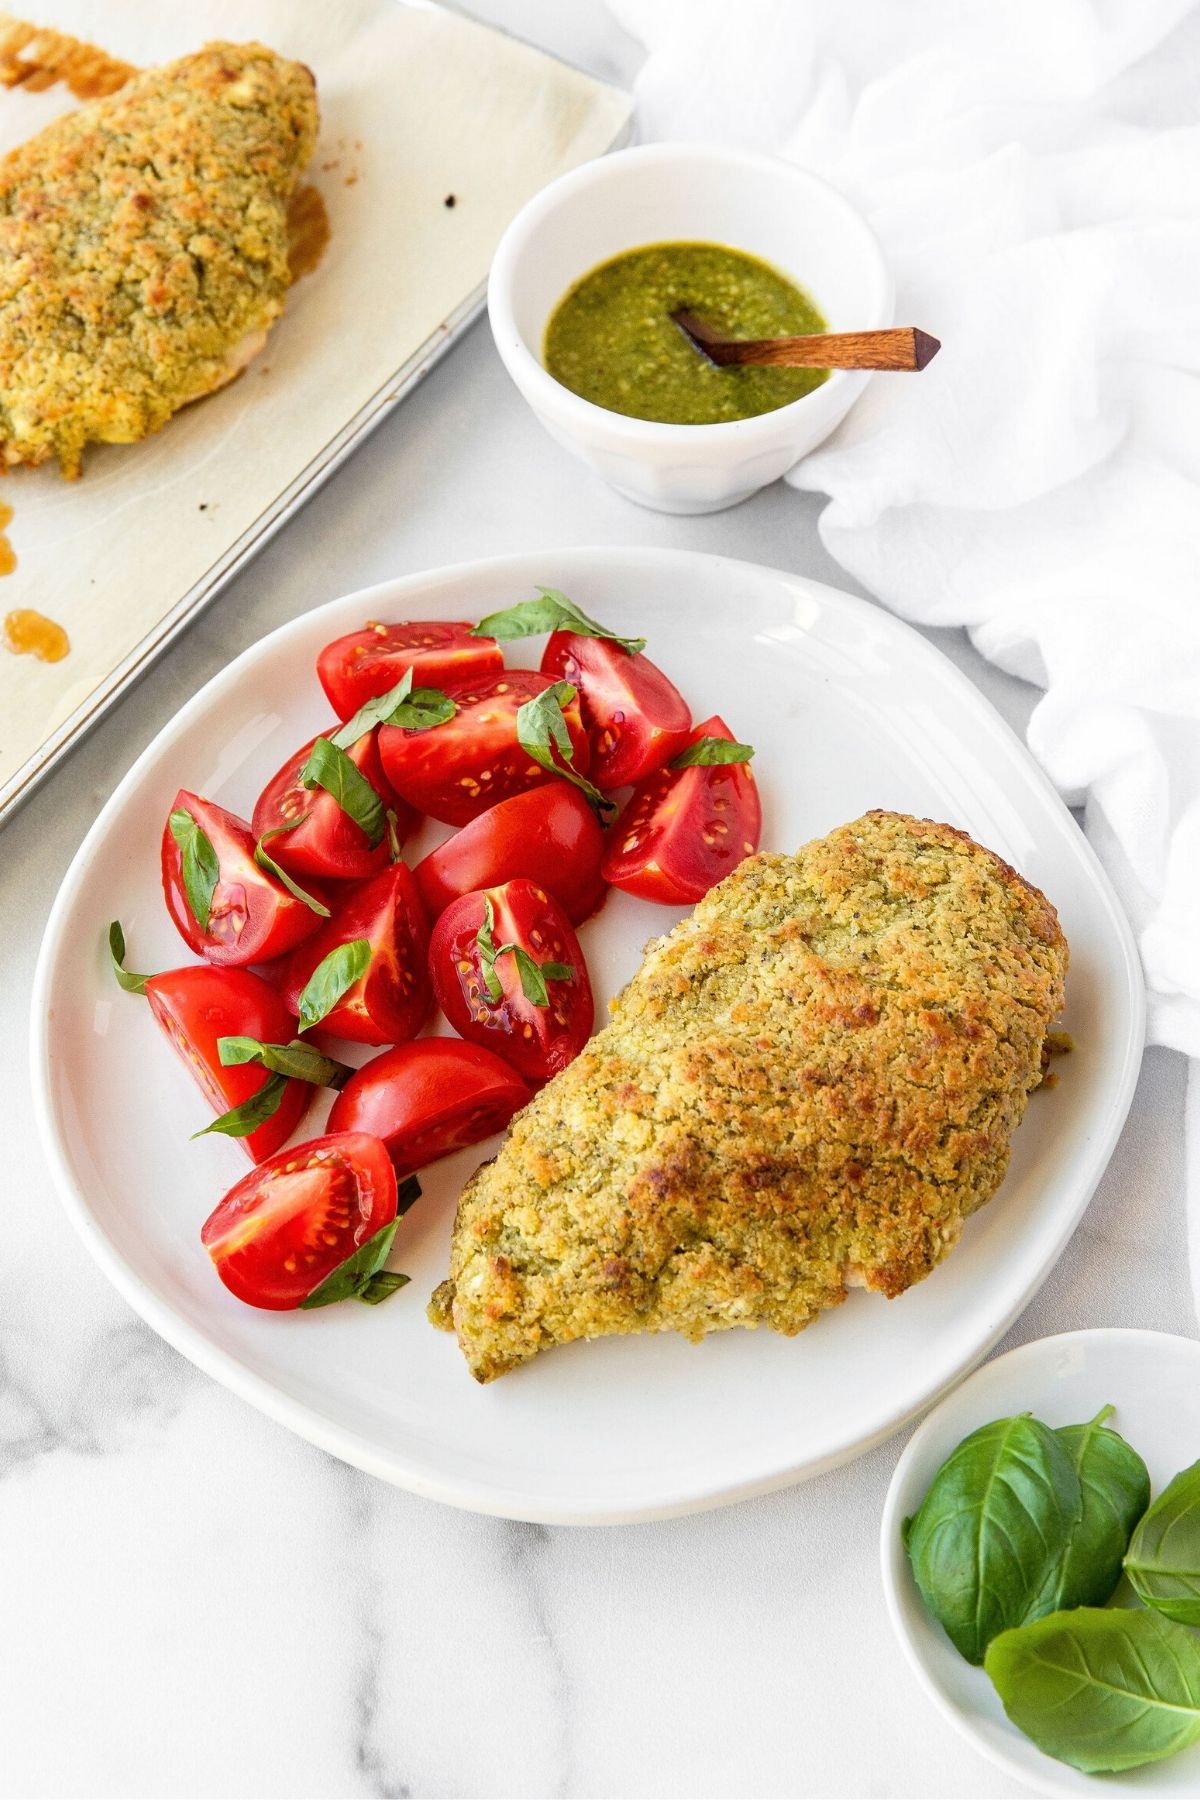 Healthy crusted chicken with pesto, goat cheese, and basil